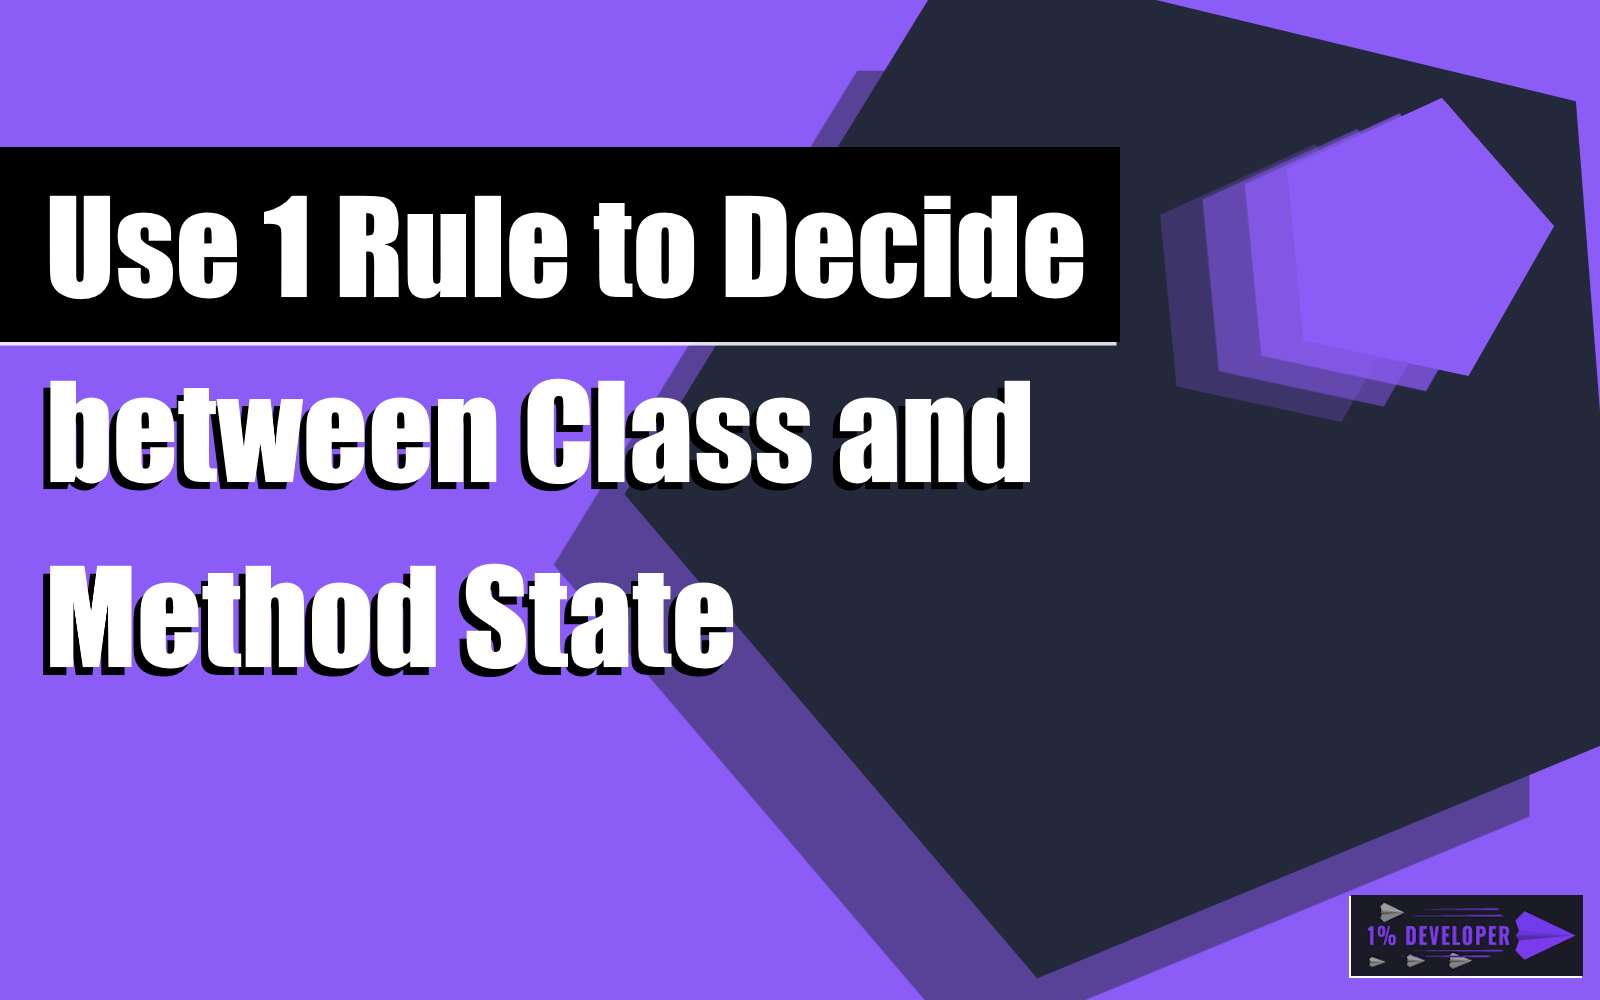 Use 1 Rule to Decide between Class and Method State